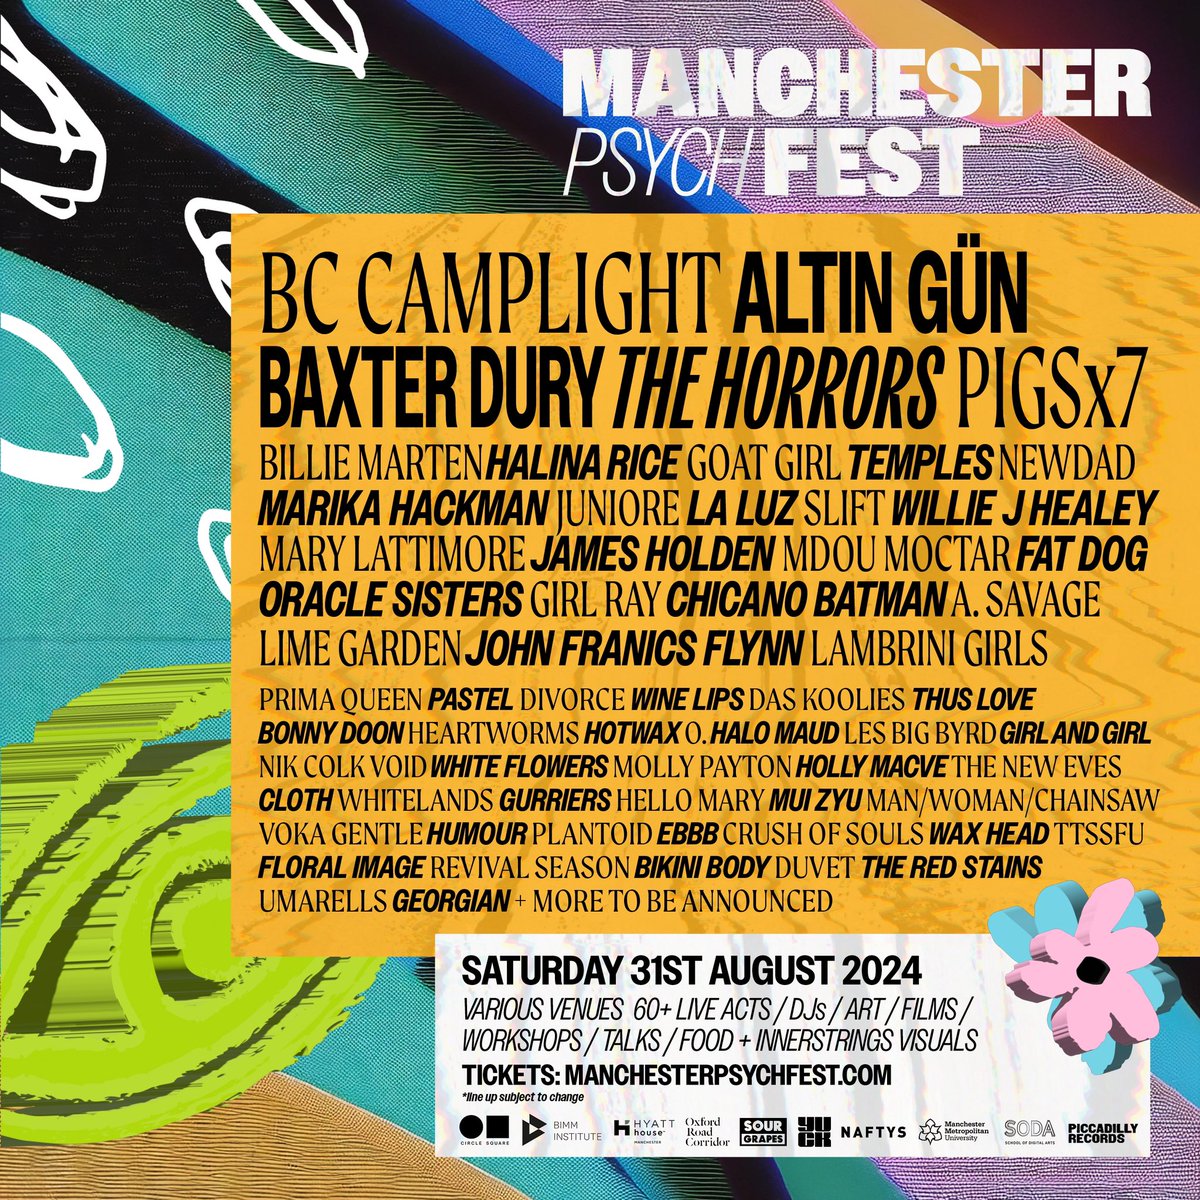 ICYMI We announced the next wave of acts for Manchester Psych Fest 2024. Featuring: @bccamplight, @altingunband , @BillieMarten , @MarikaHackman , SLIFT and loads more joining the party on 31st August. Tickets/info: manchesterpsychfest.com